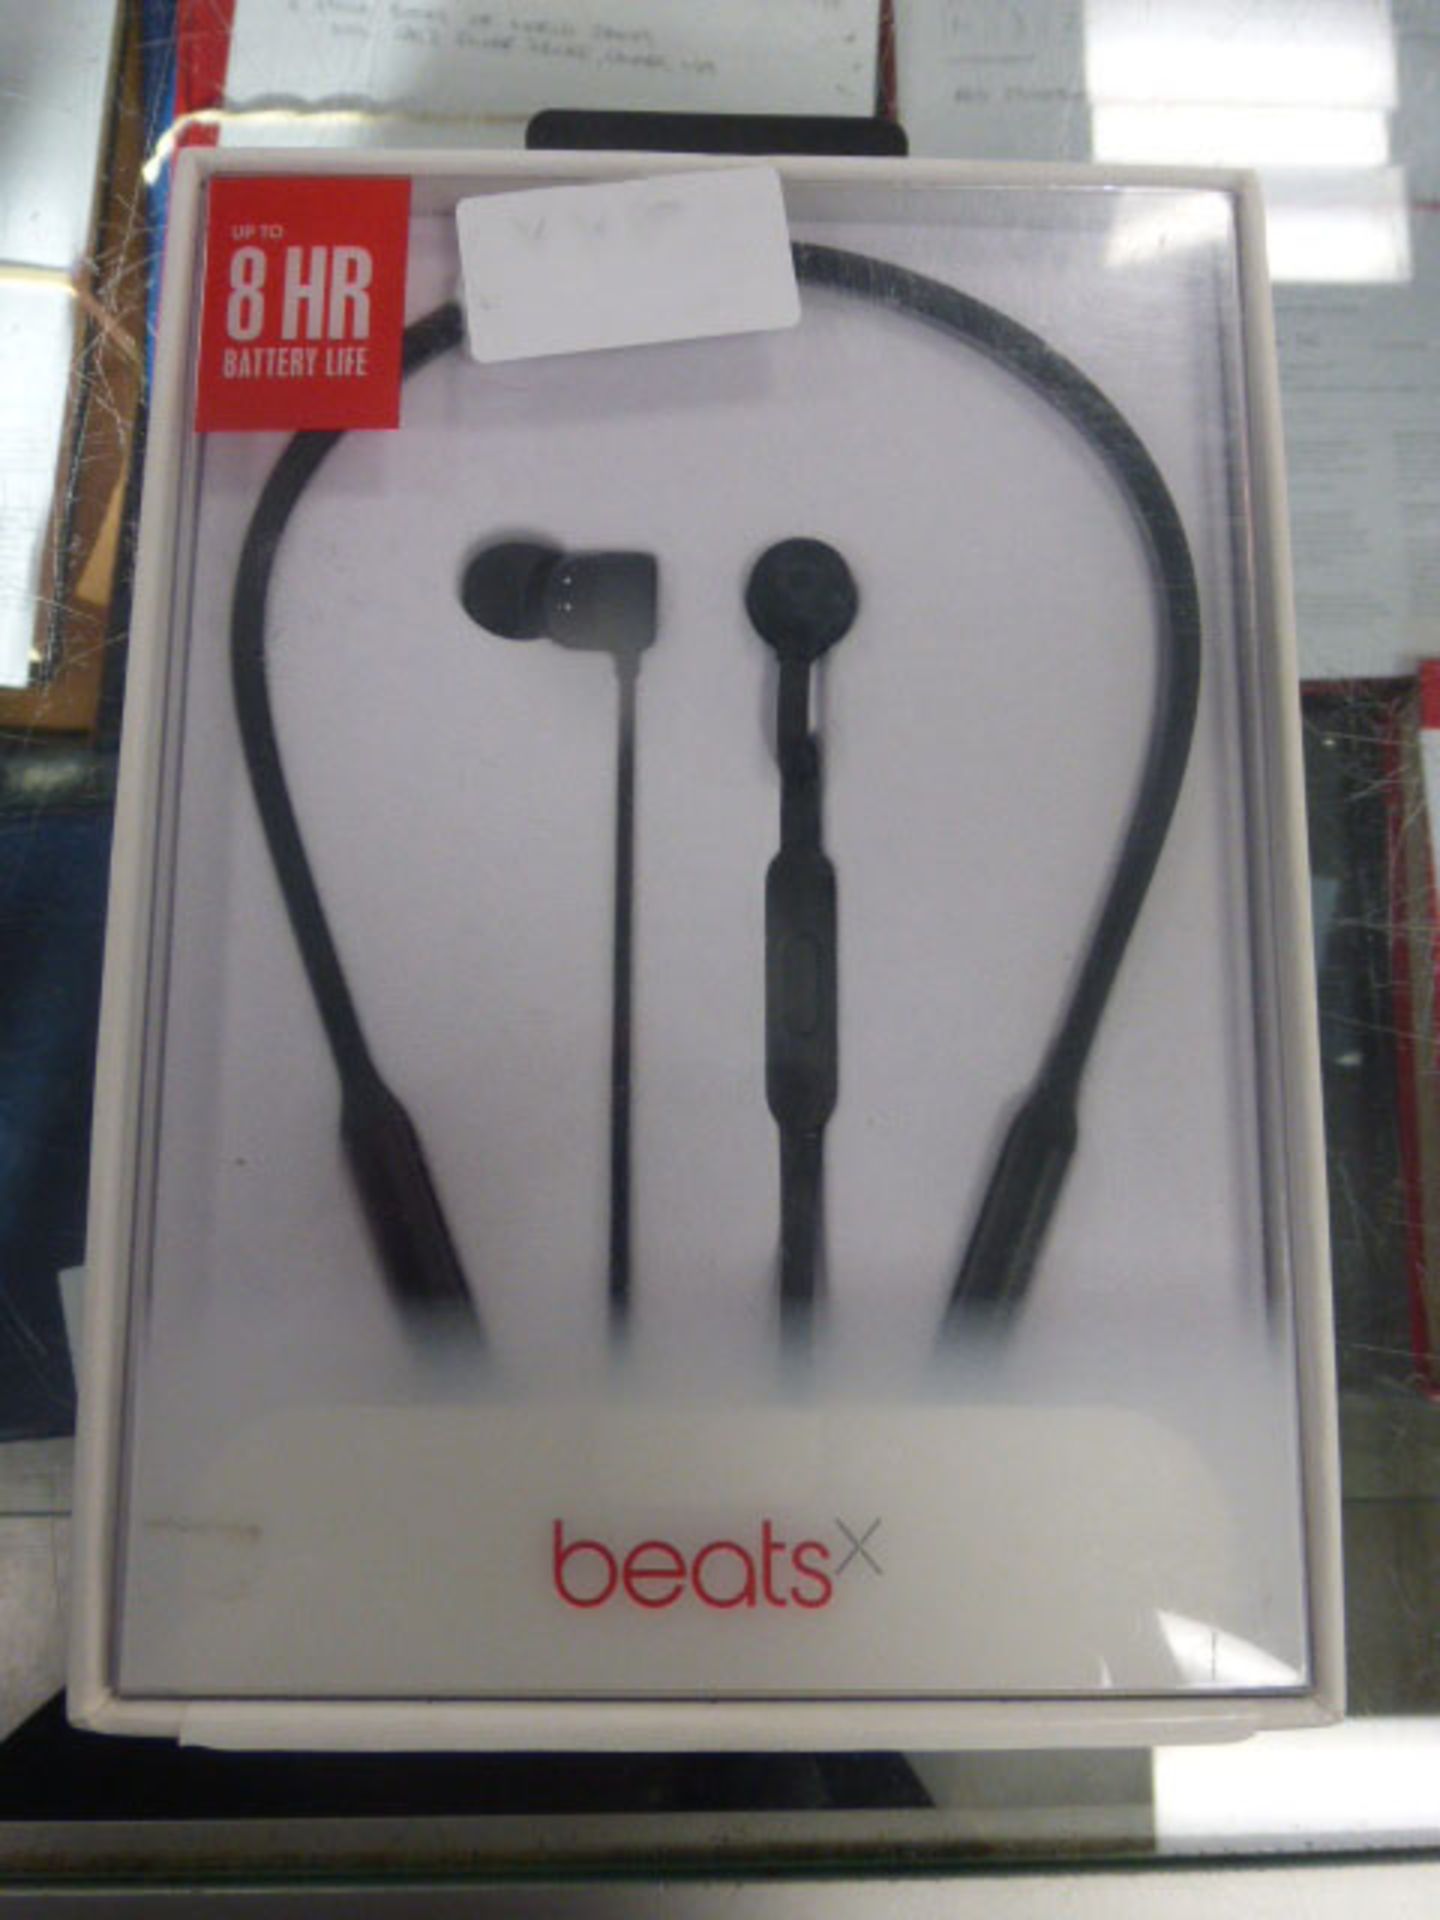 Boxed set of Beats X by Dr Dre wireless headset